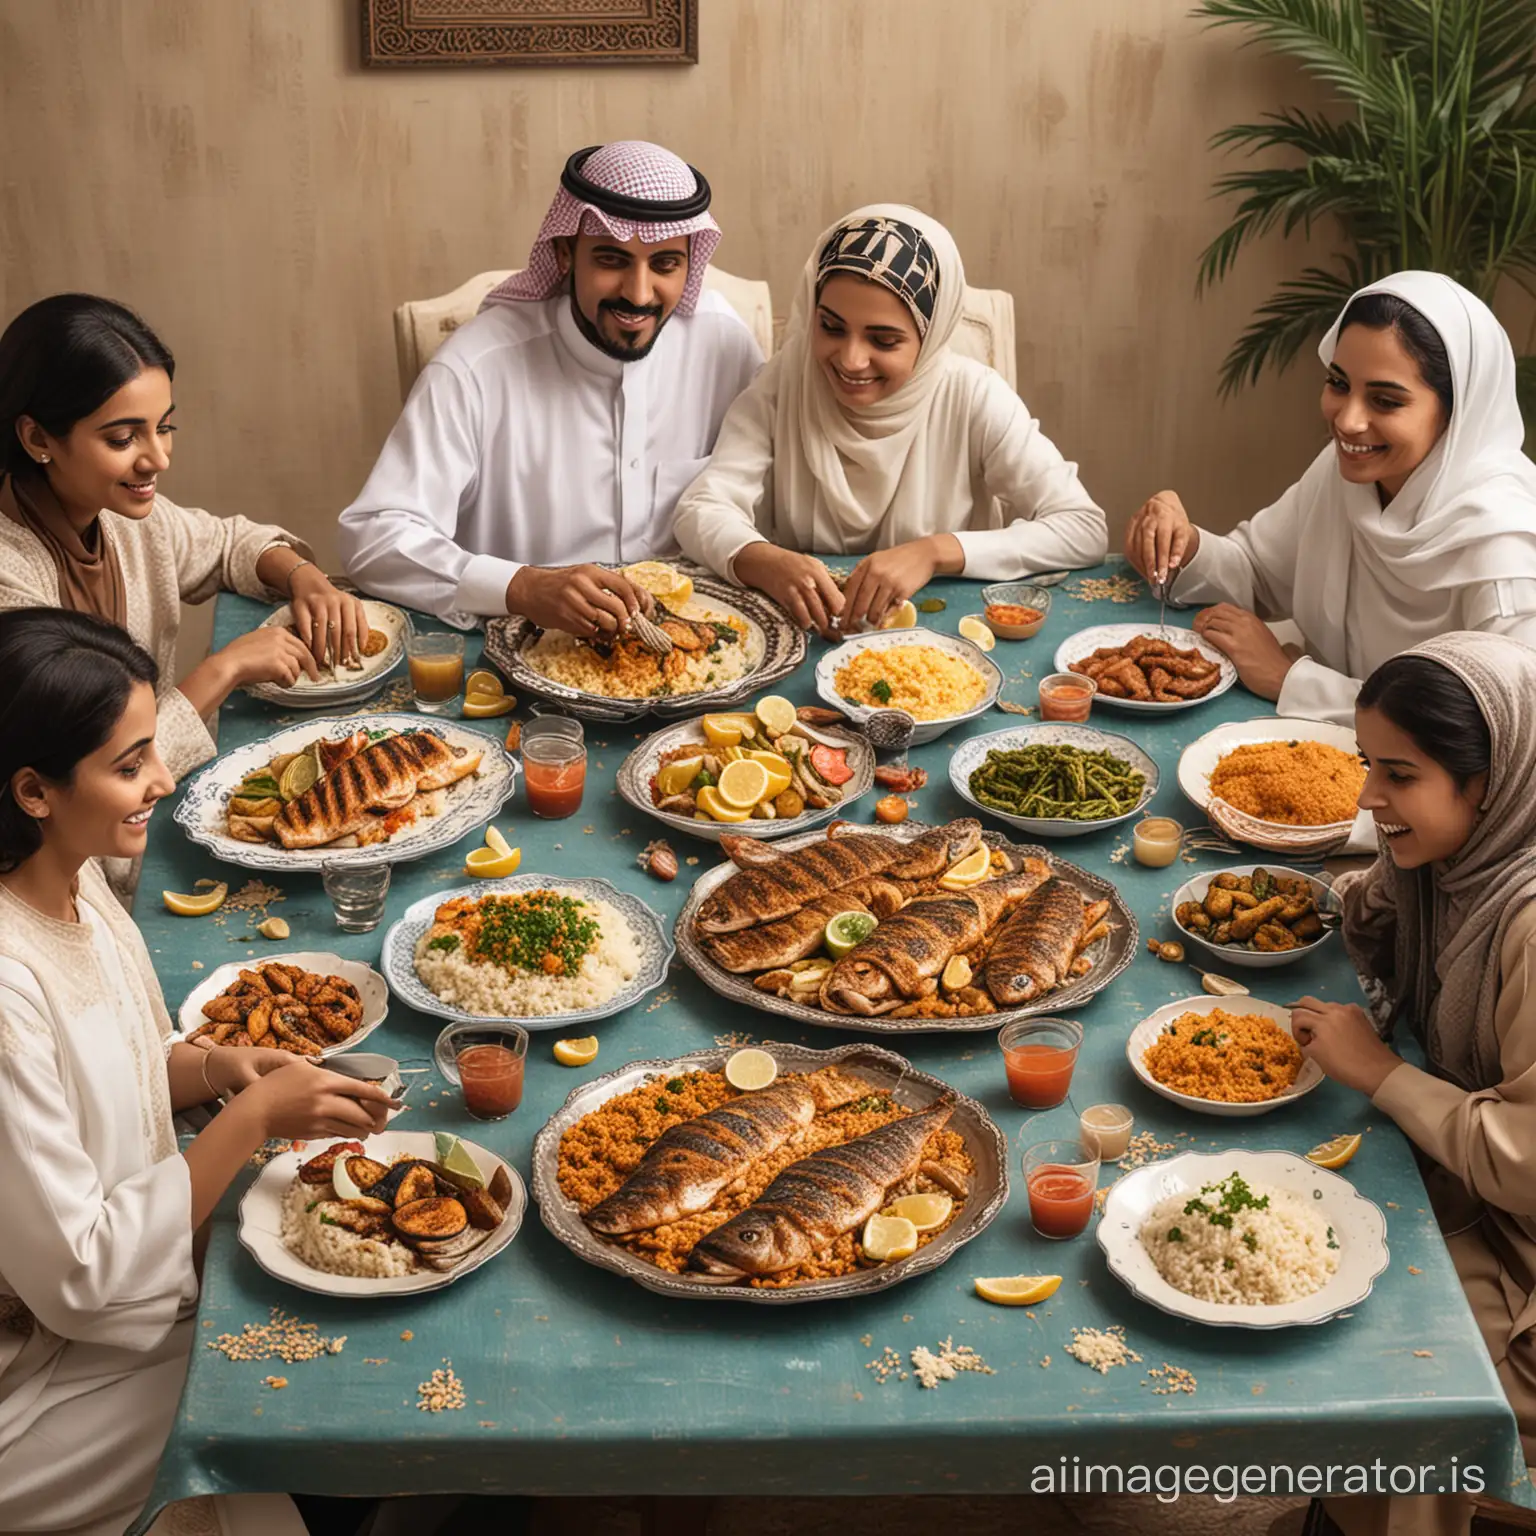 A realistic picture of a Saudi family gathering around the table over plates of grilled fish and rice